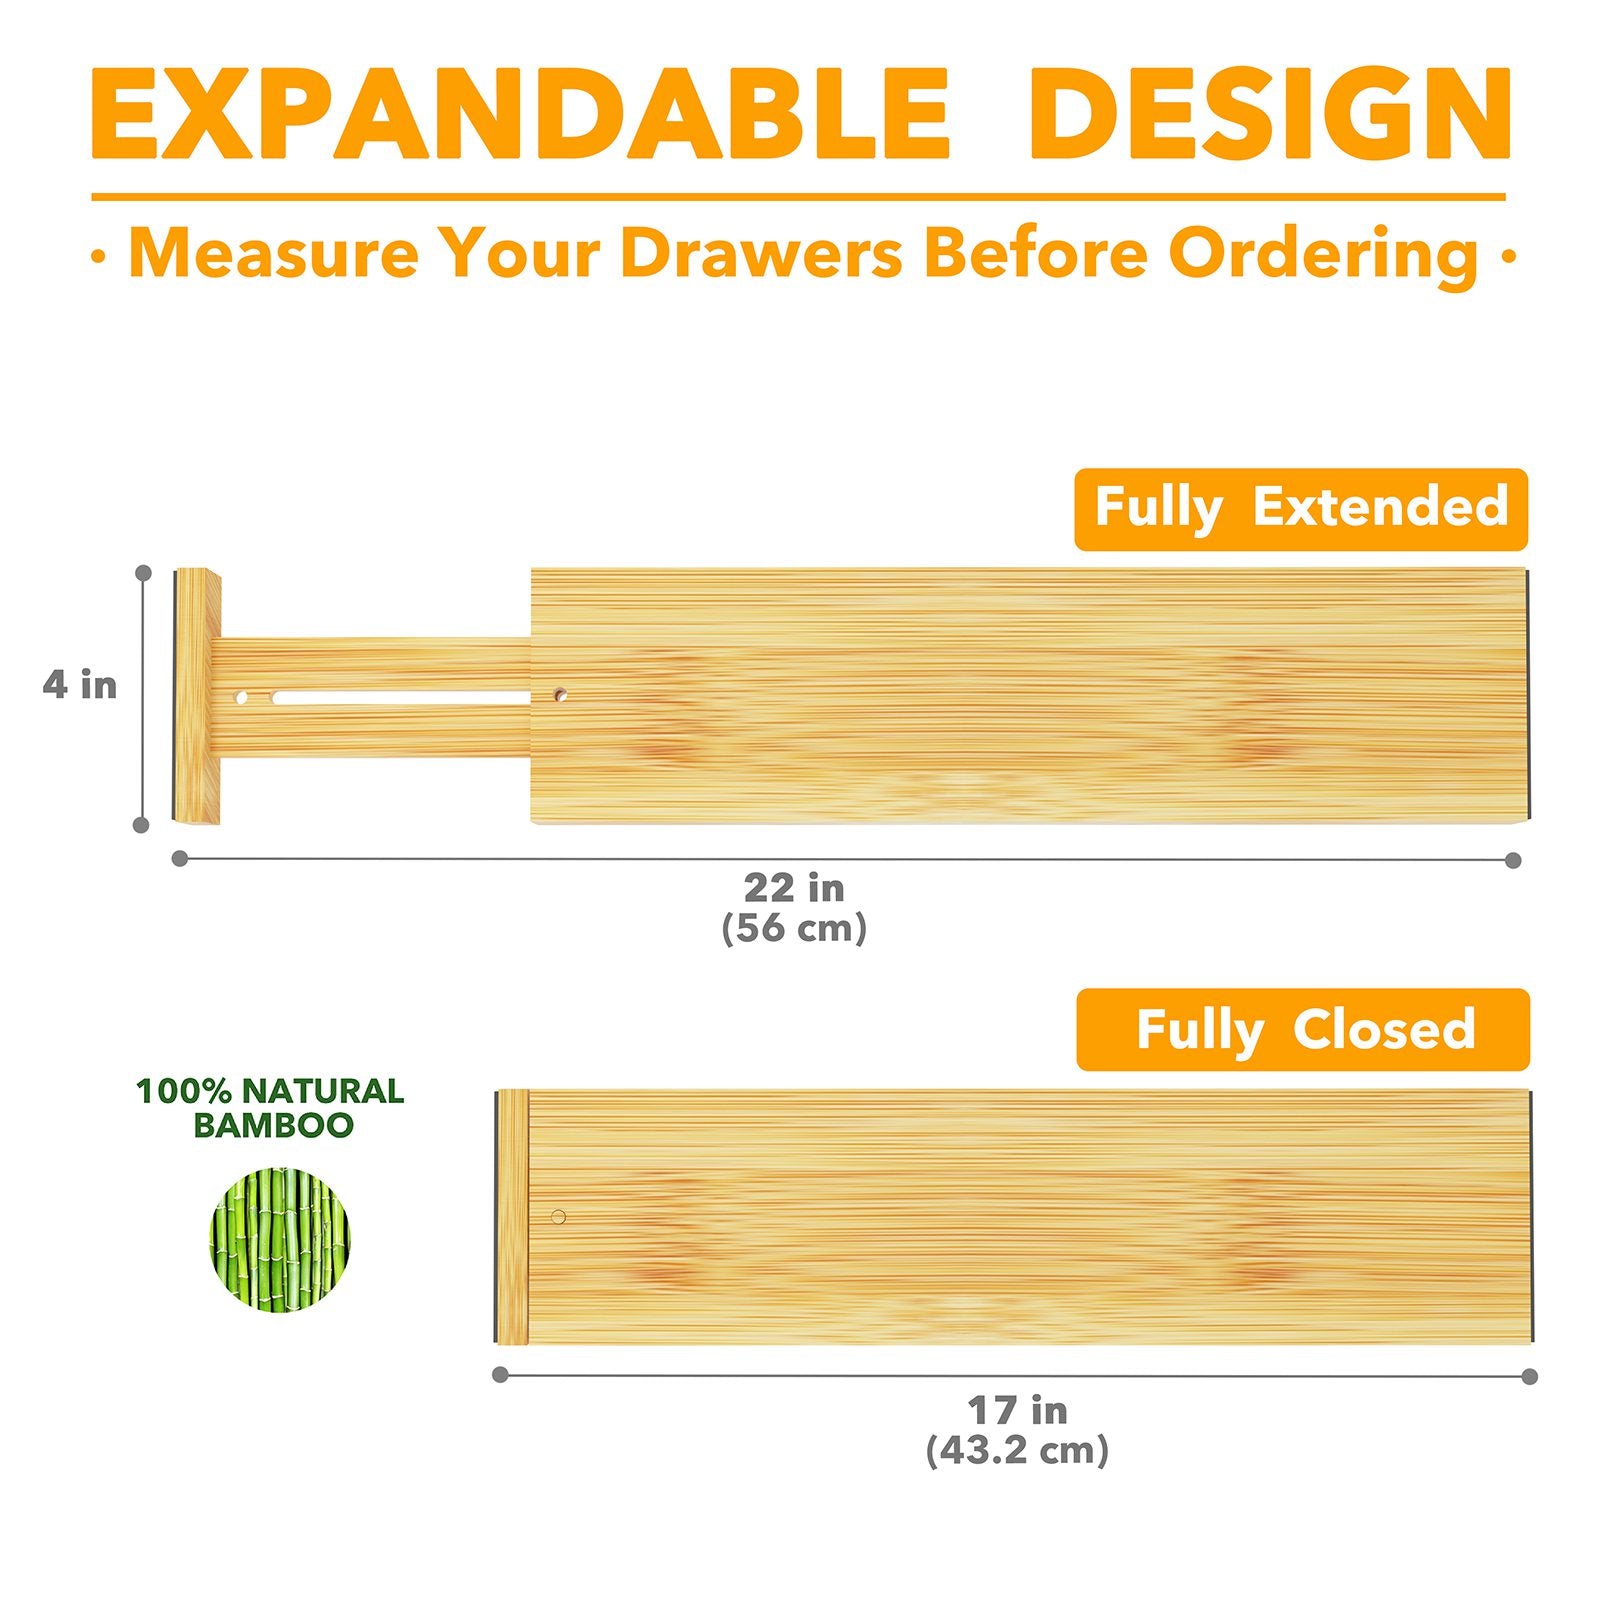 SpaceAid Bamboo Drawer Dividers with Inserts and Labels, Kitchen Adjustable Drawer Organizers, Expandable Organization for Home, Office, Dressers, 4